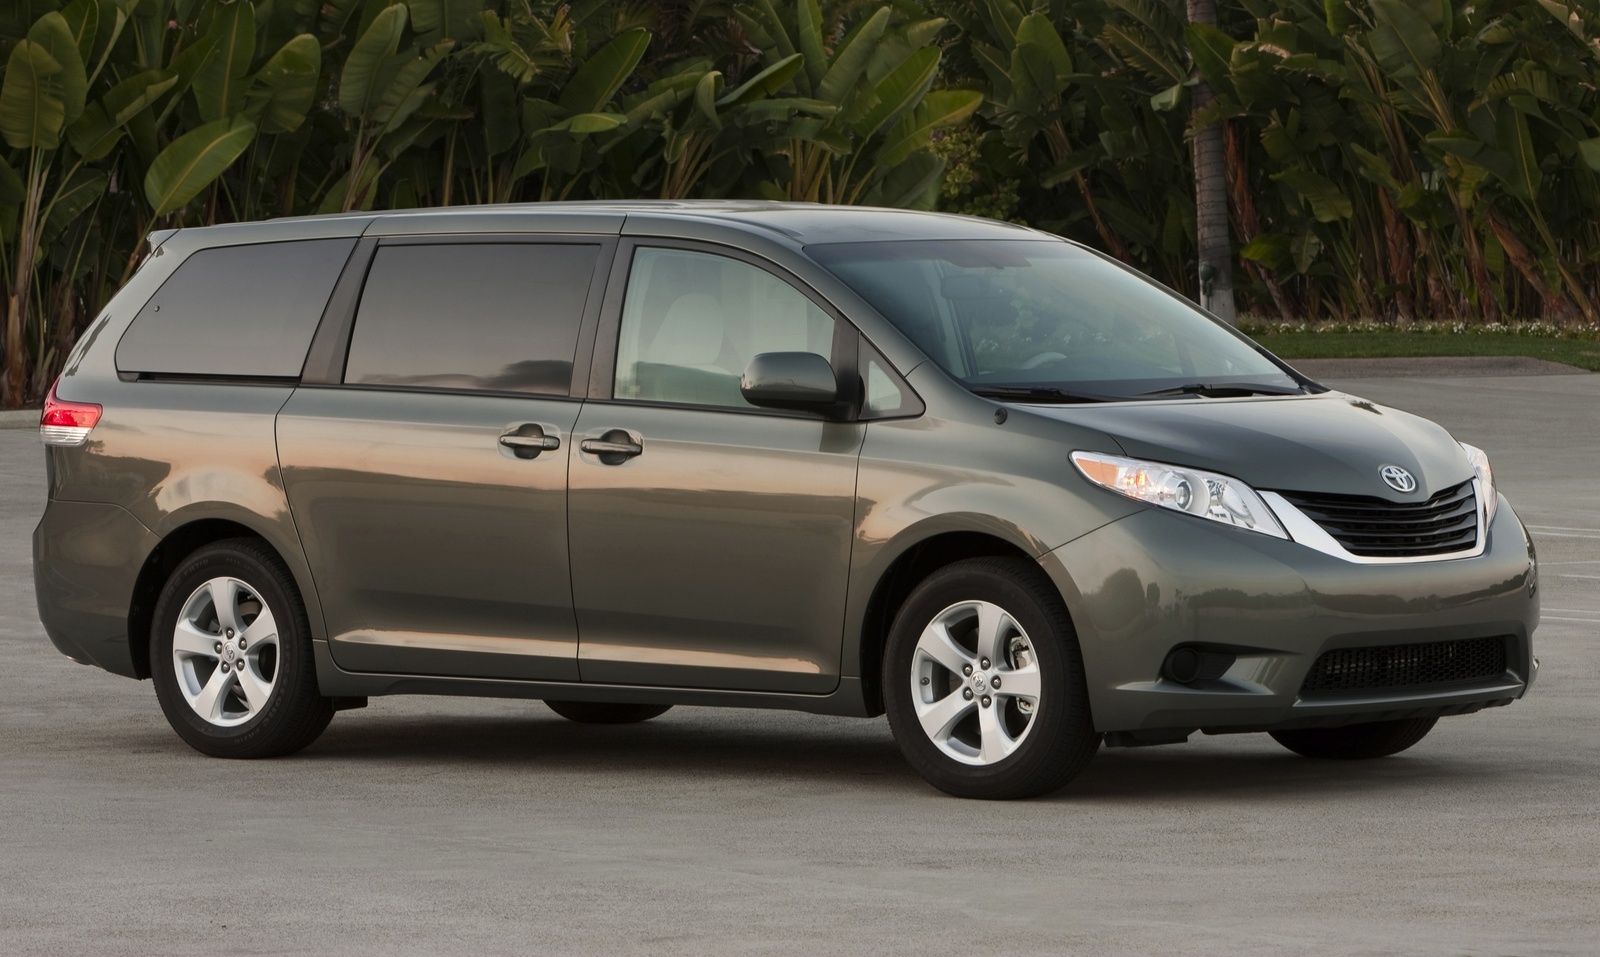 2012 sienna toyota review #7